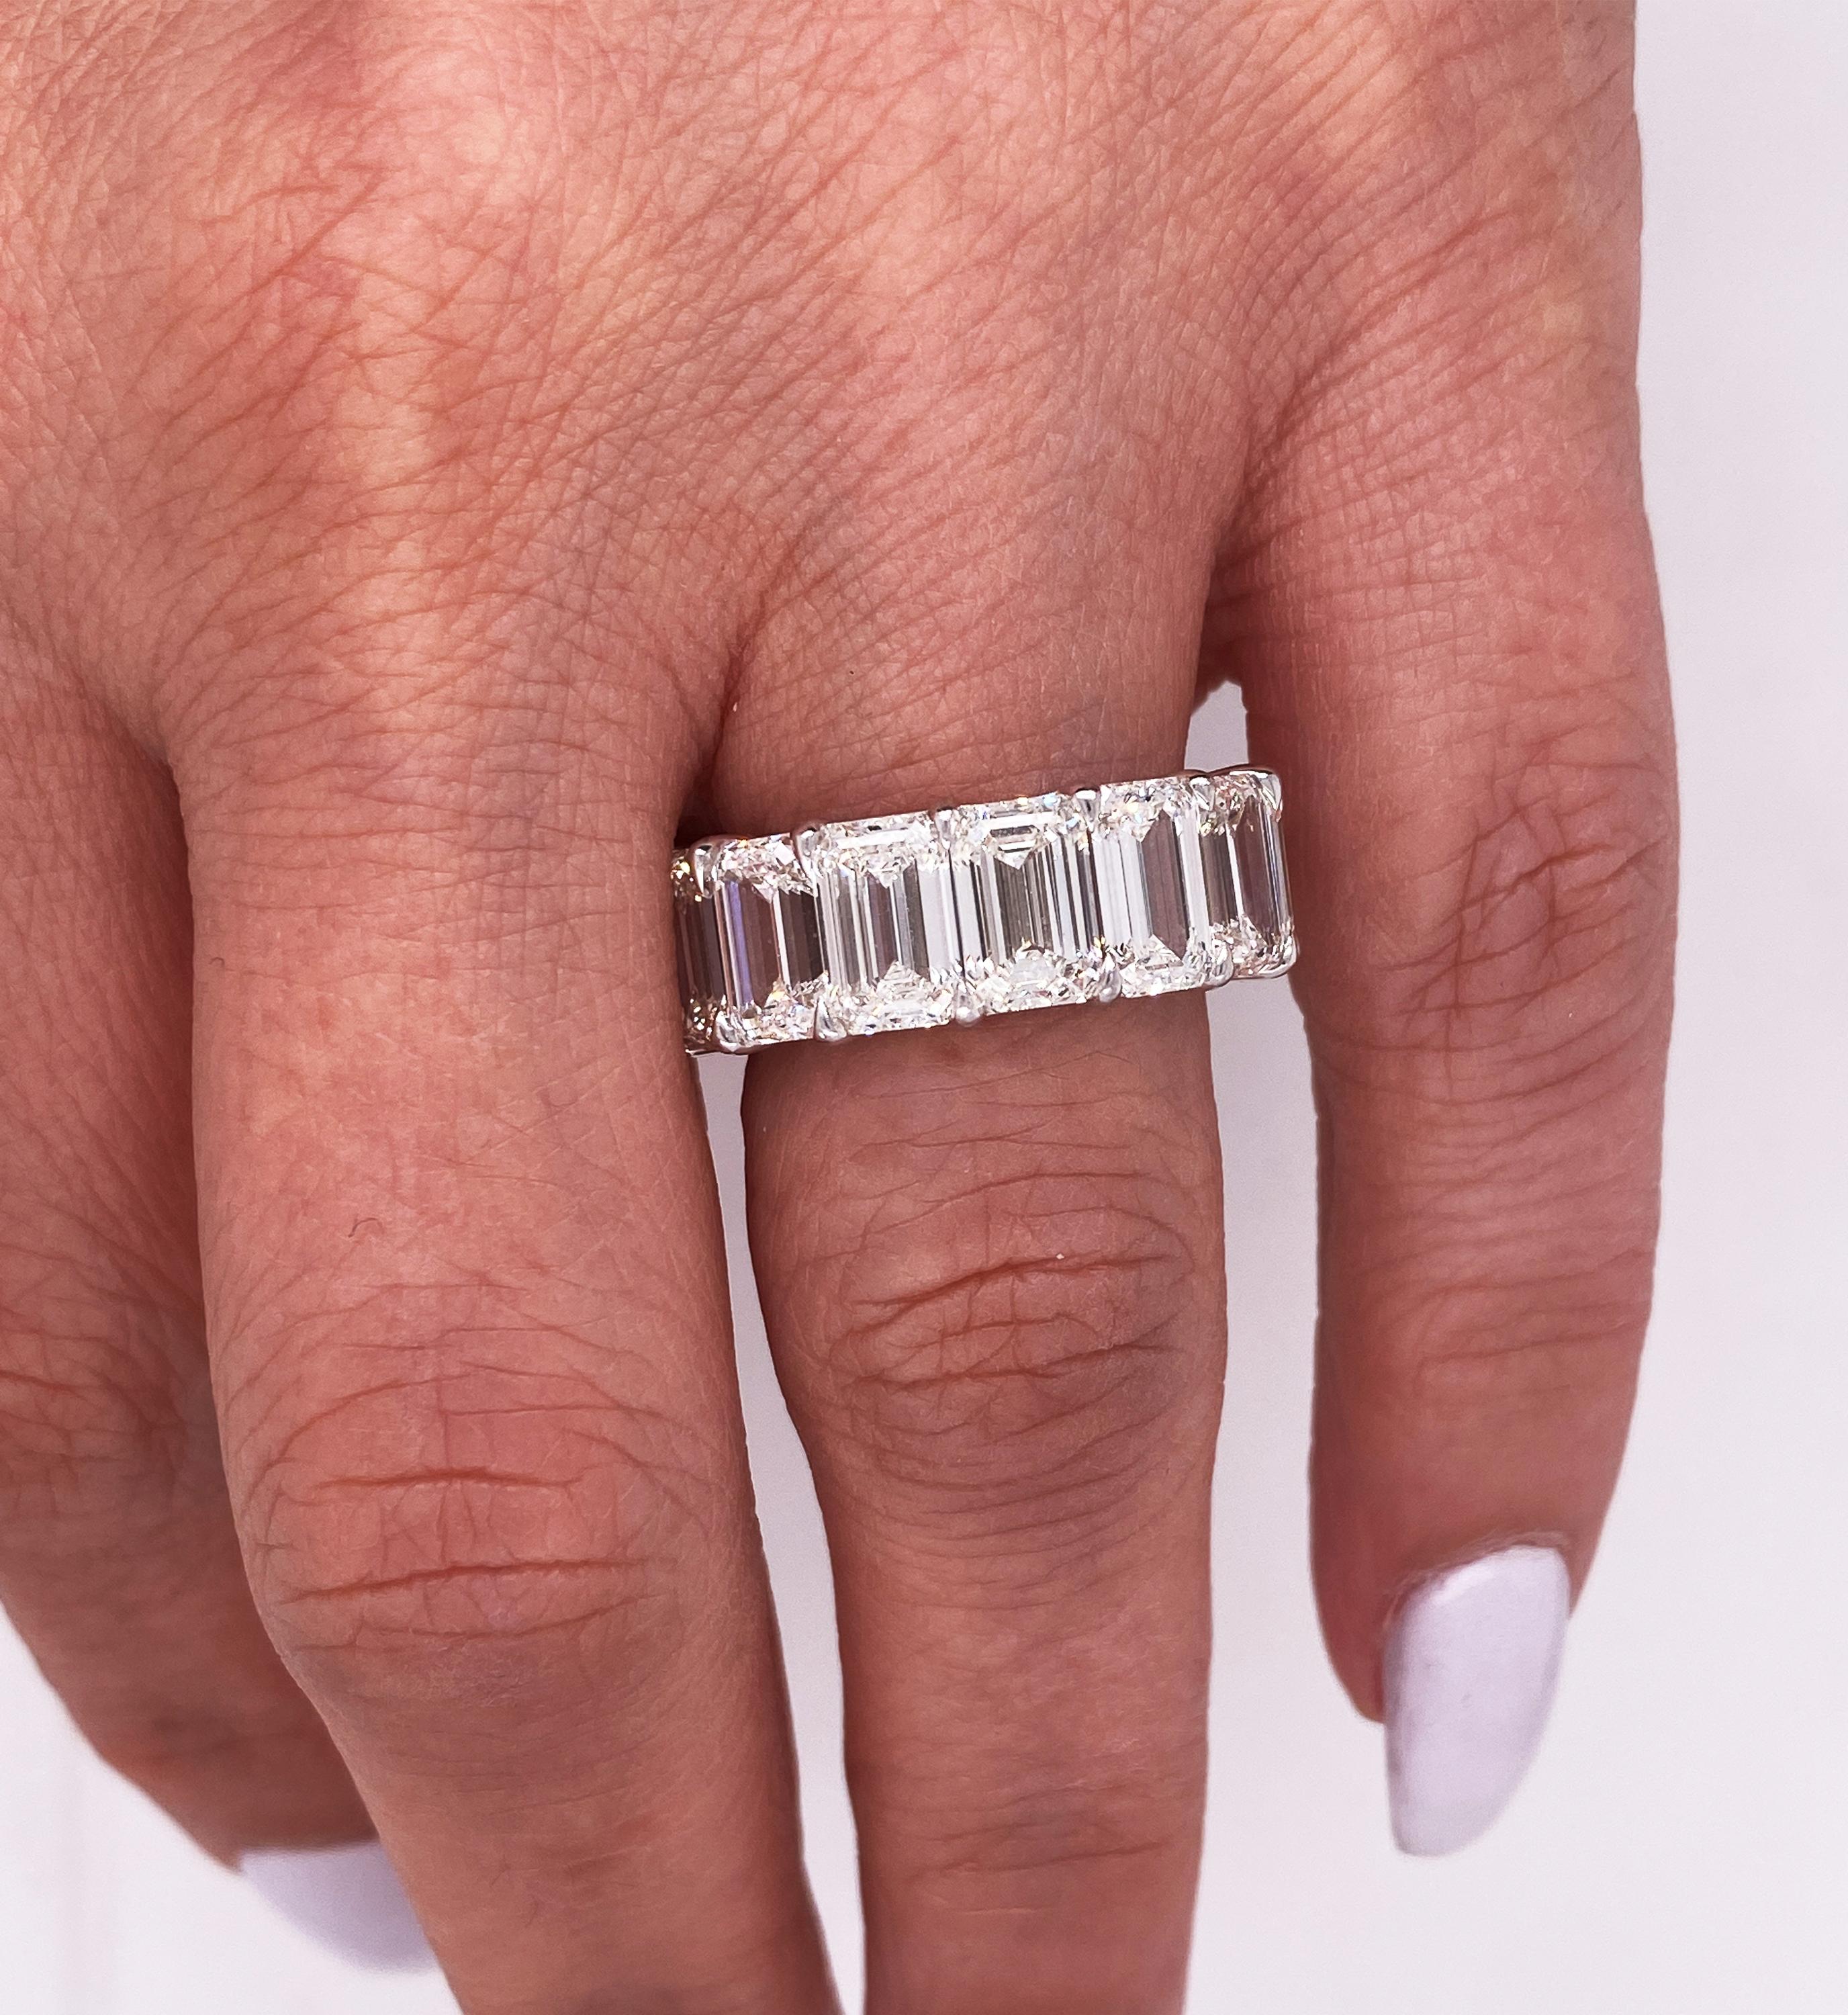 14.19 Carat Emerald Cut Diamonds All GIA Certified Platinum Eternity Band

This incredible band features 14 emerald cut diamond. Each GIA certified. Diamonds are all J color and VVS2-VS2 clarity. Average 1.01 carat each. 14 GIA certificates will be